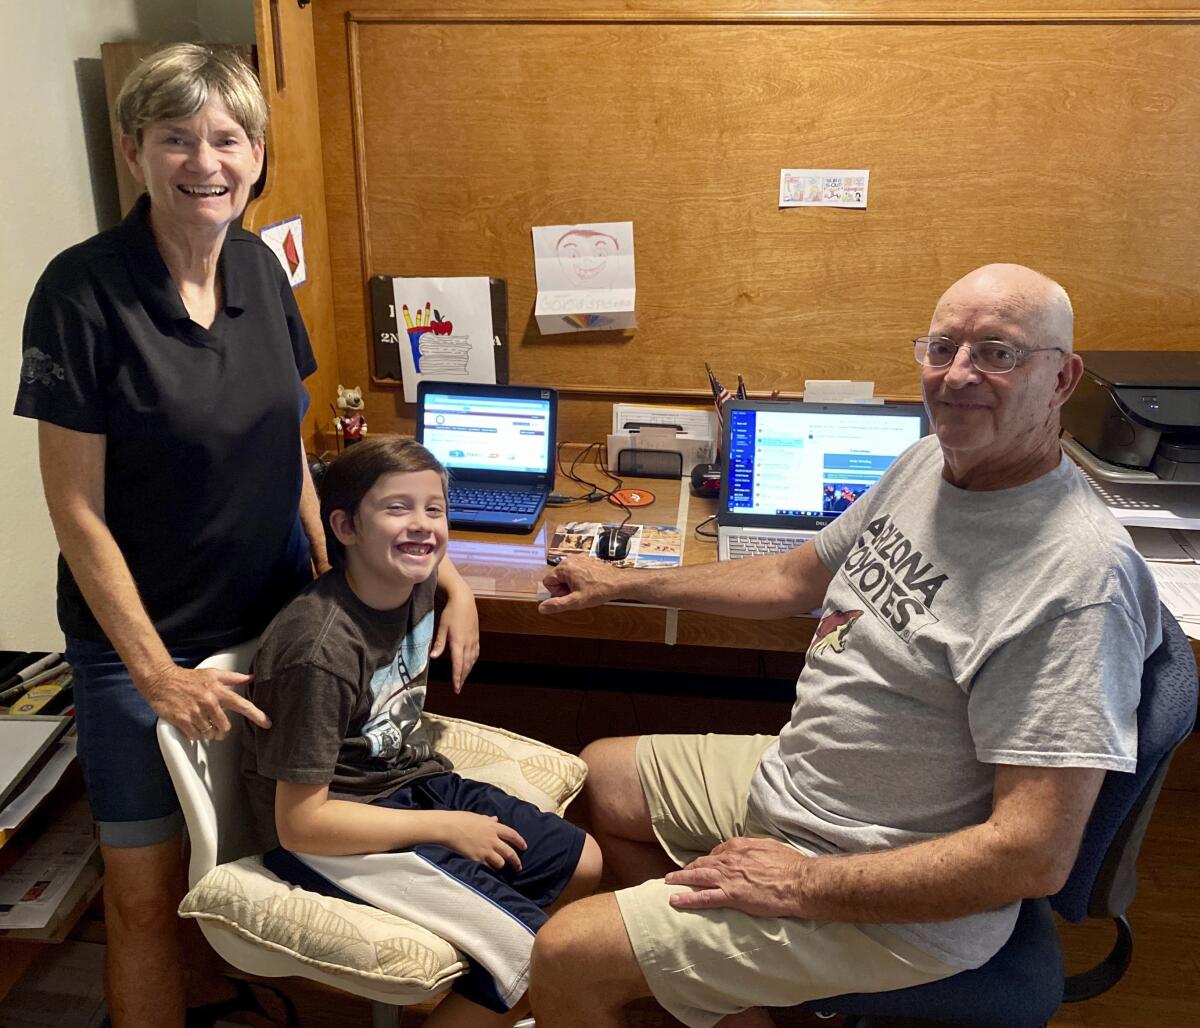 Bill and Mary Hill at their computer desk with their 8-year-old grandson, Will.